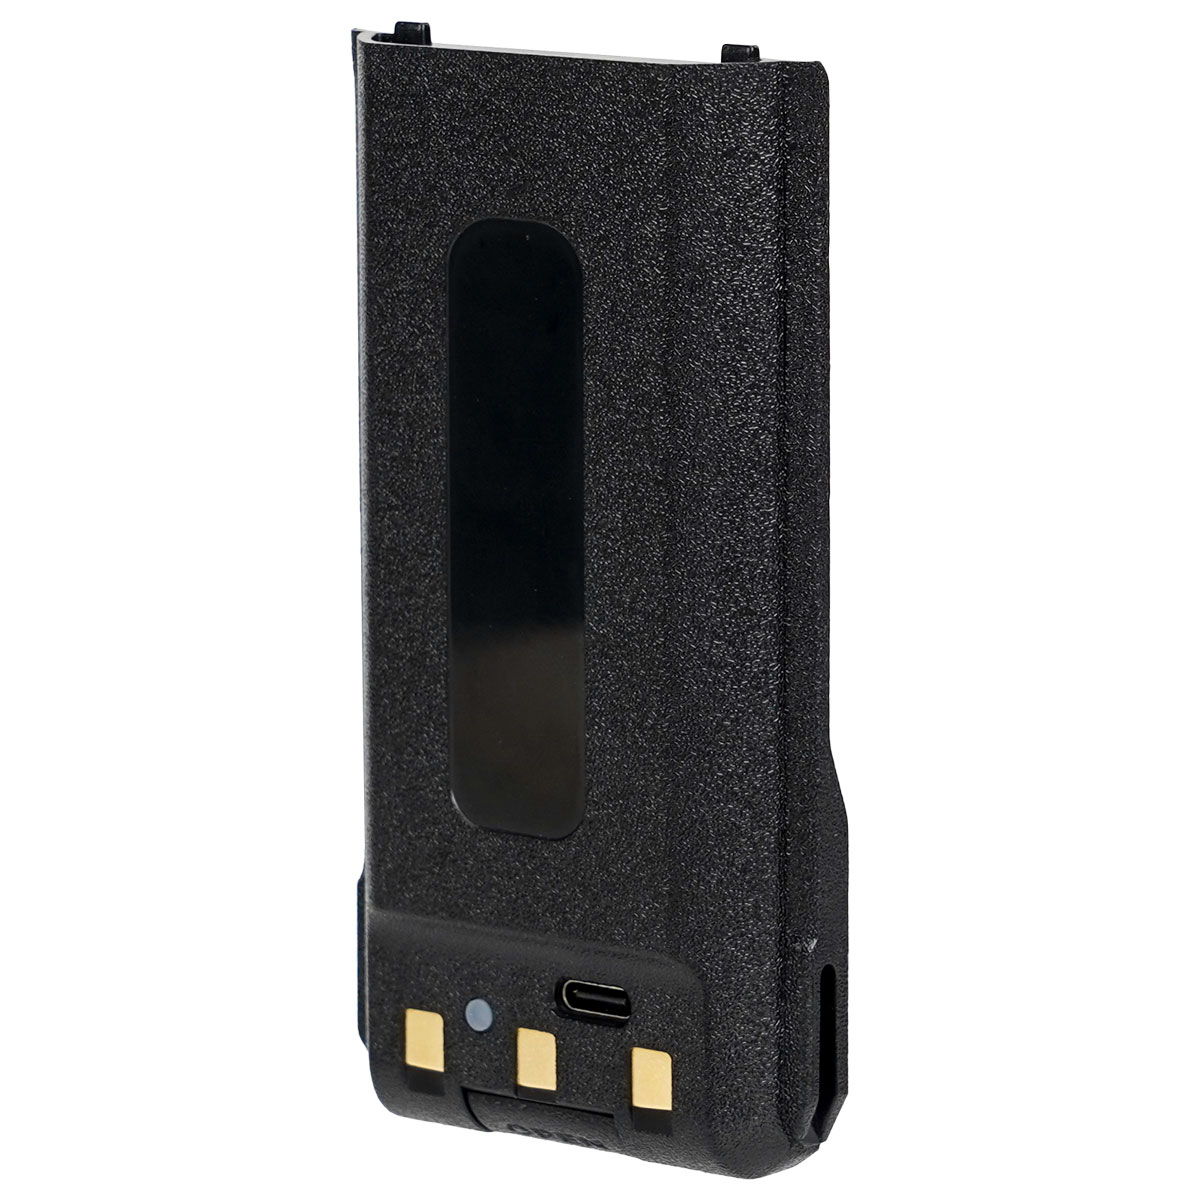 Original 3200mAh rechargeable lithium-ion walkie-talkie battery